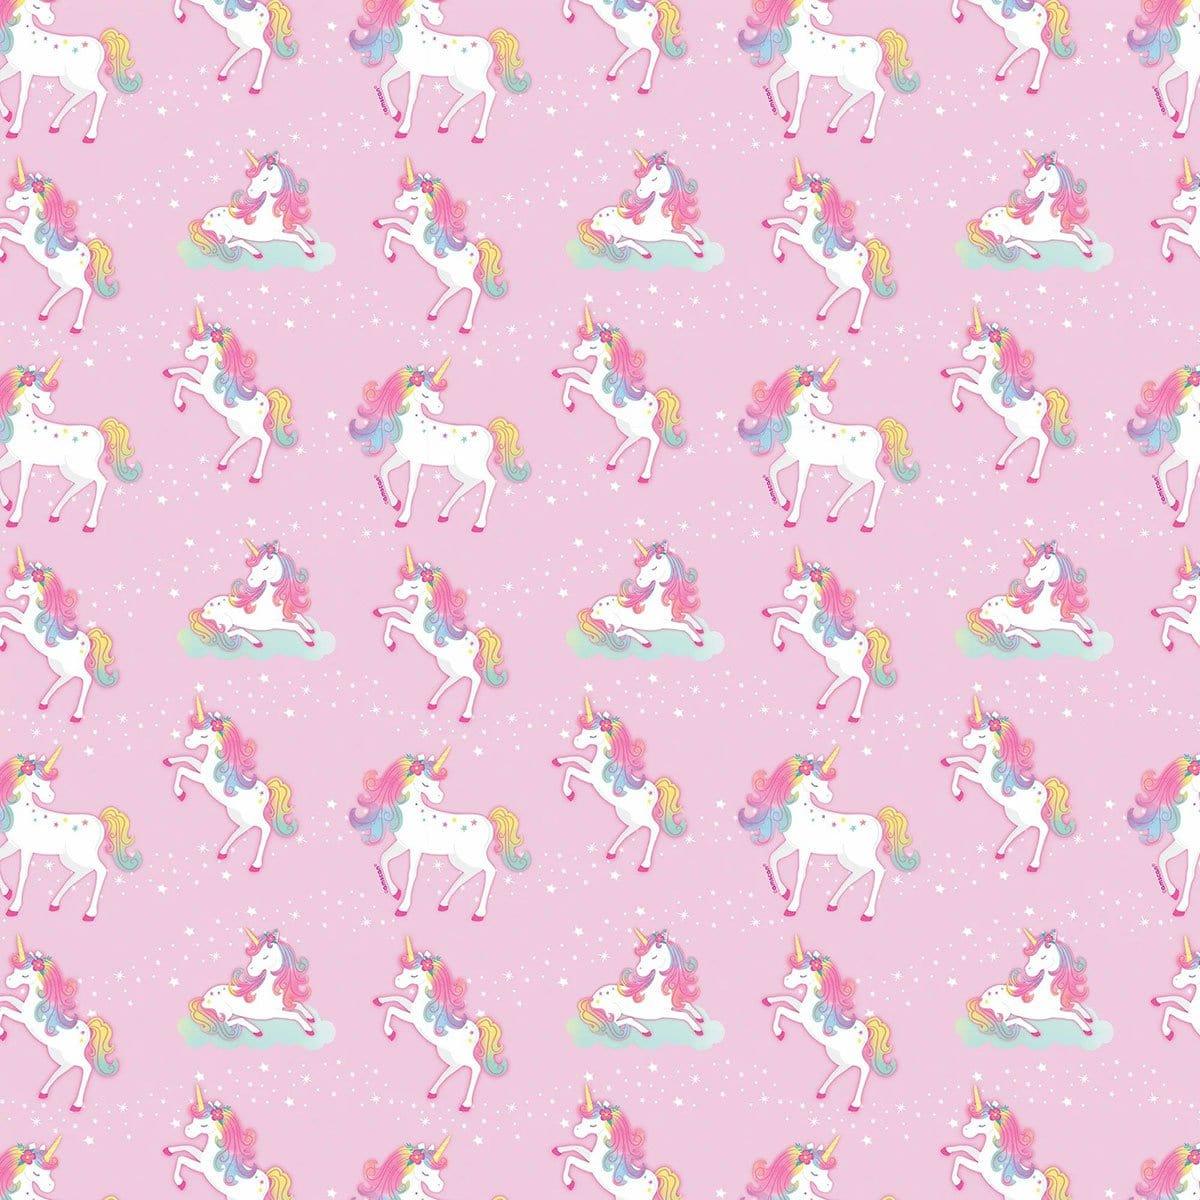 Buy Kids Birthday Enchanted Unicorn Gift Wrap Roll sold at Party Expert